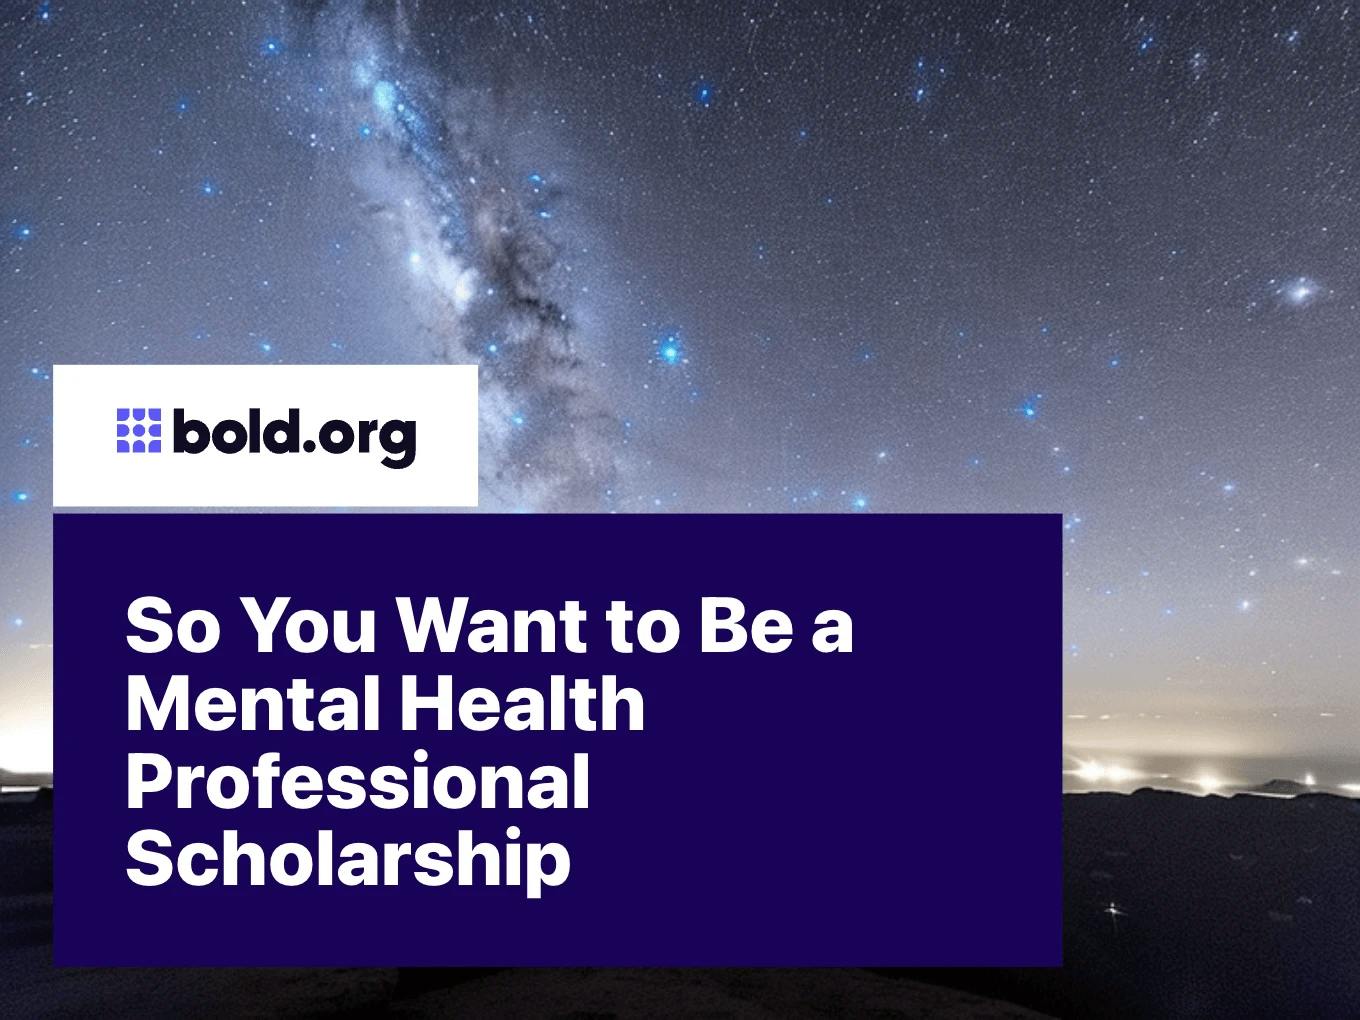 So You Want to Be a Mental Health Professional Scholarship